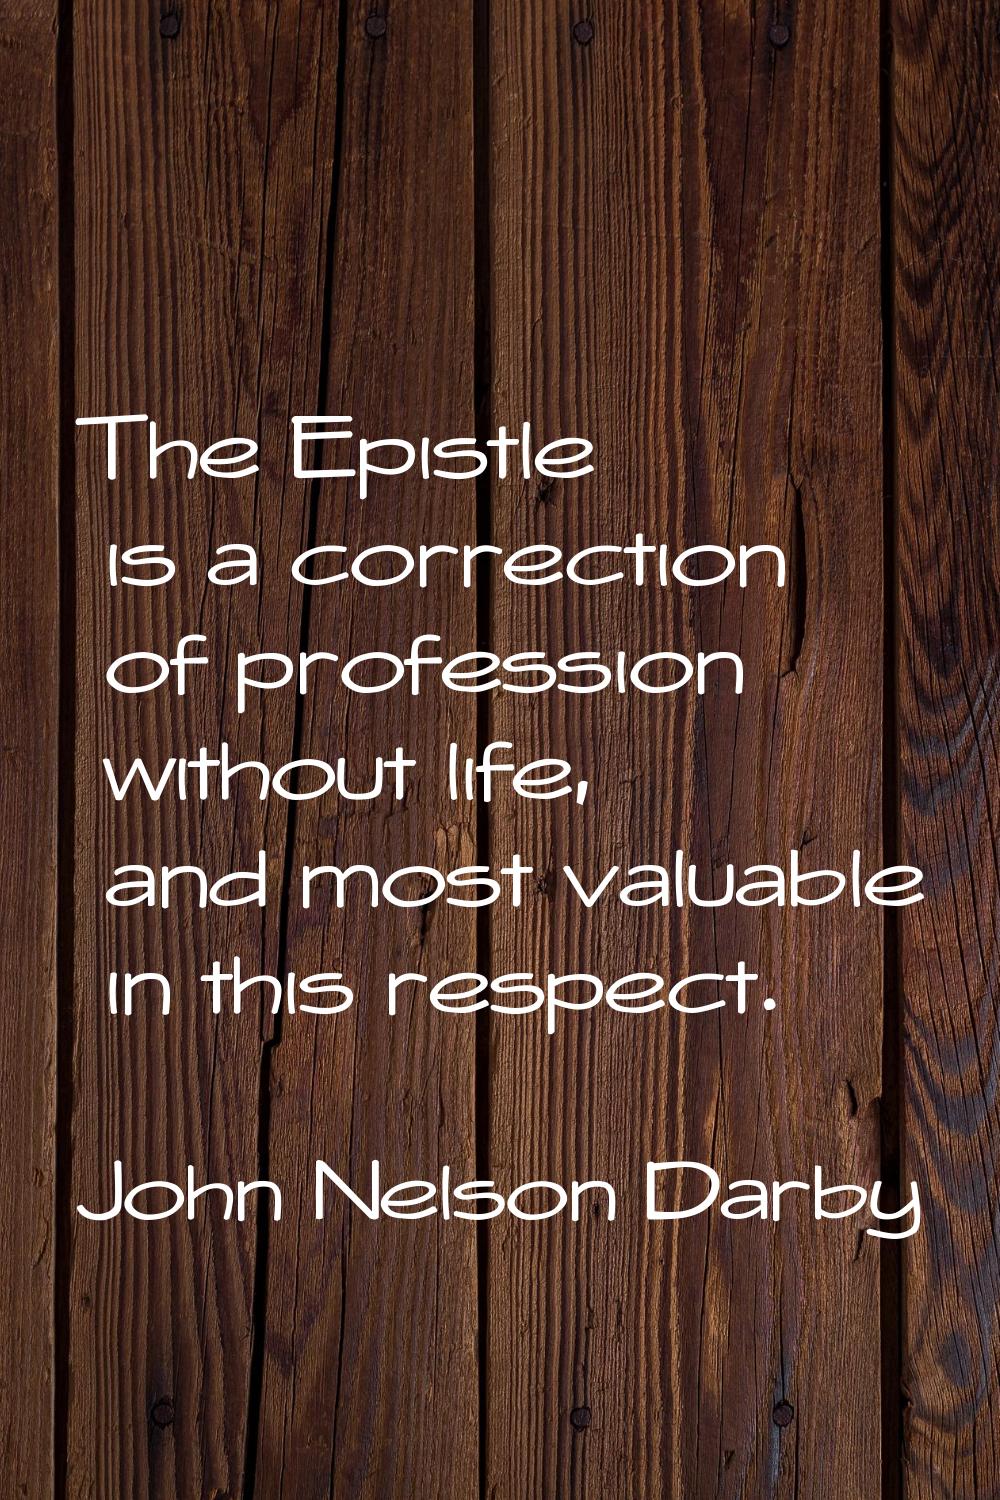 The Epistle is a correction of profession without life, and most valuable in this respect.